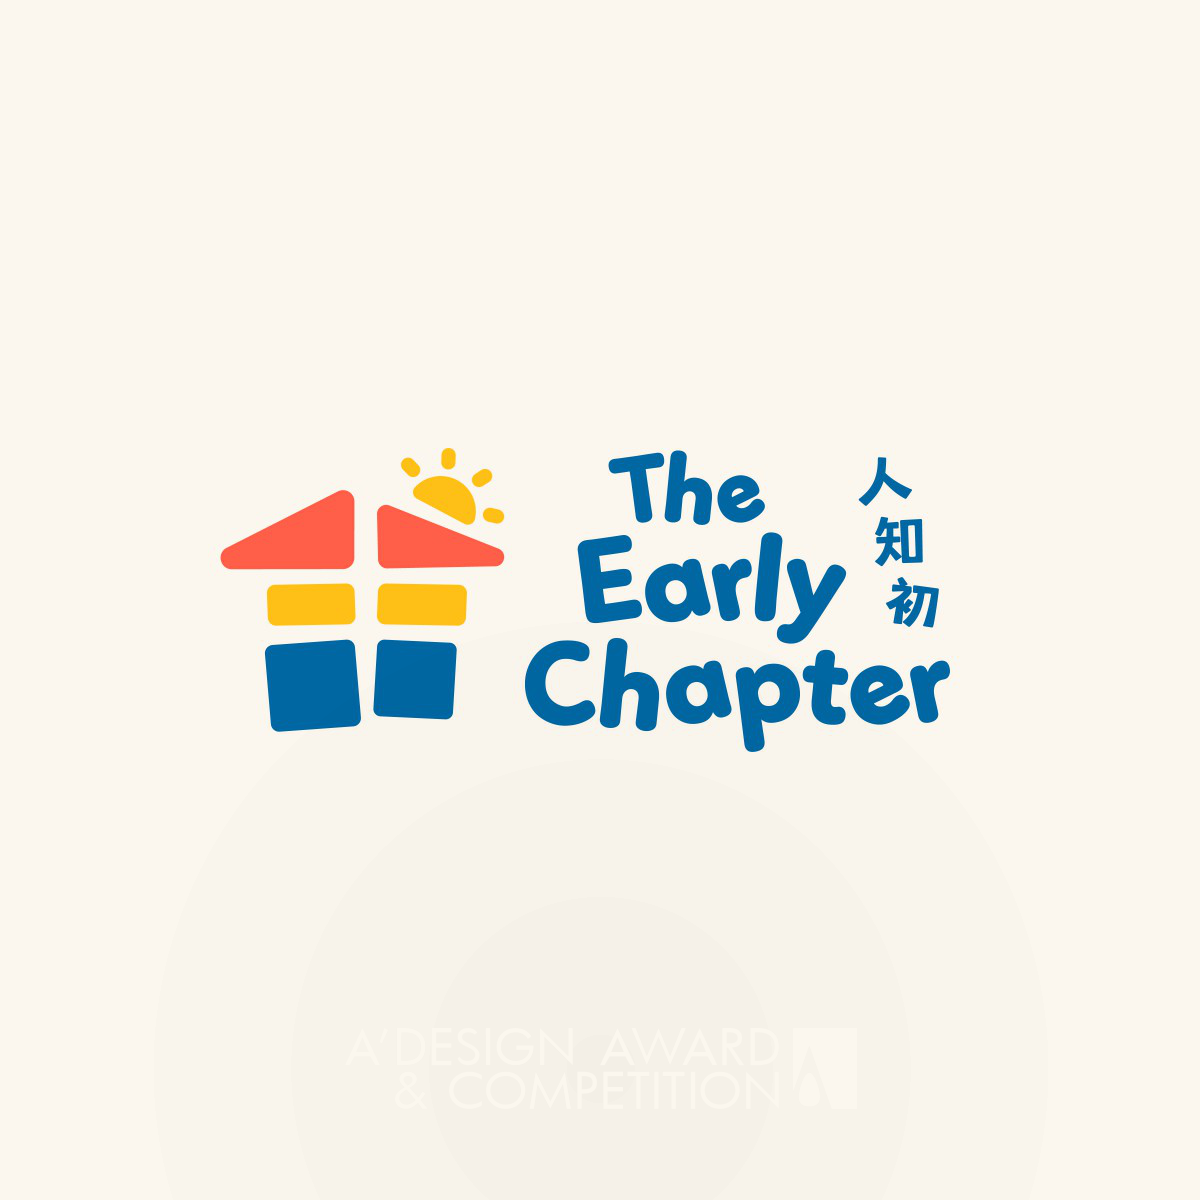 The Early Chapter: A Fun and Uplifting Logo for an Early Childhood Clubhouse